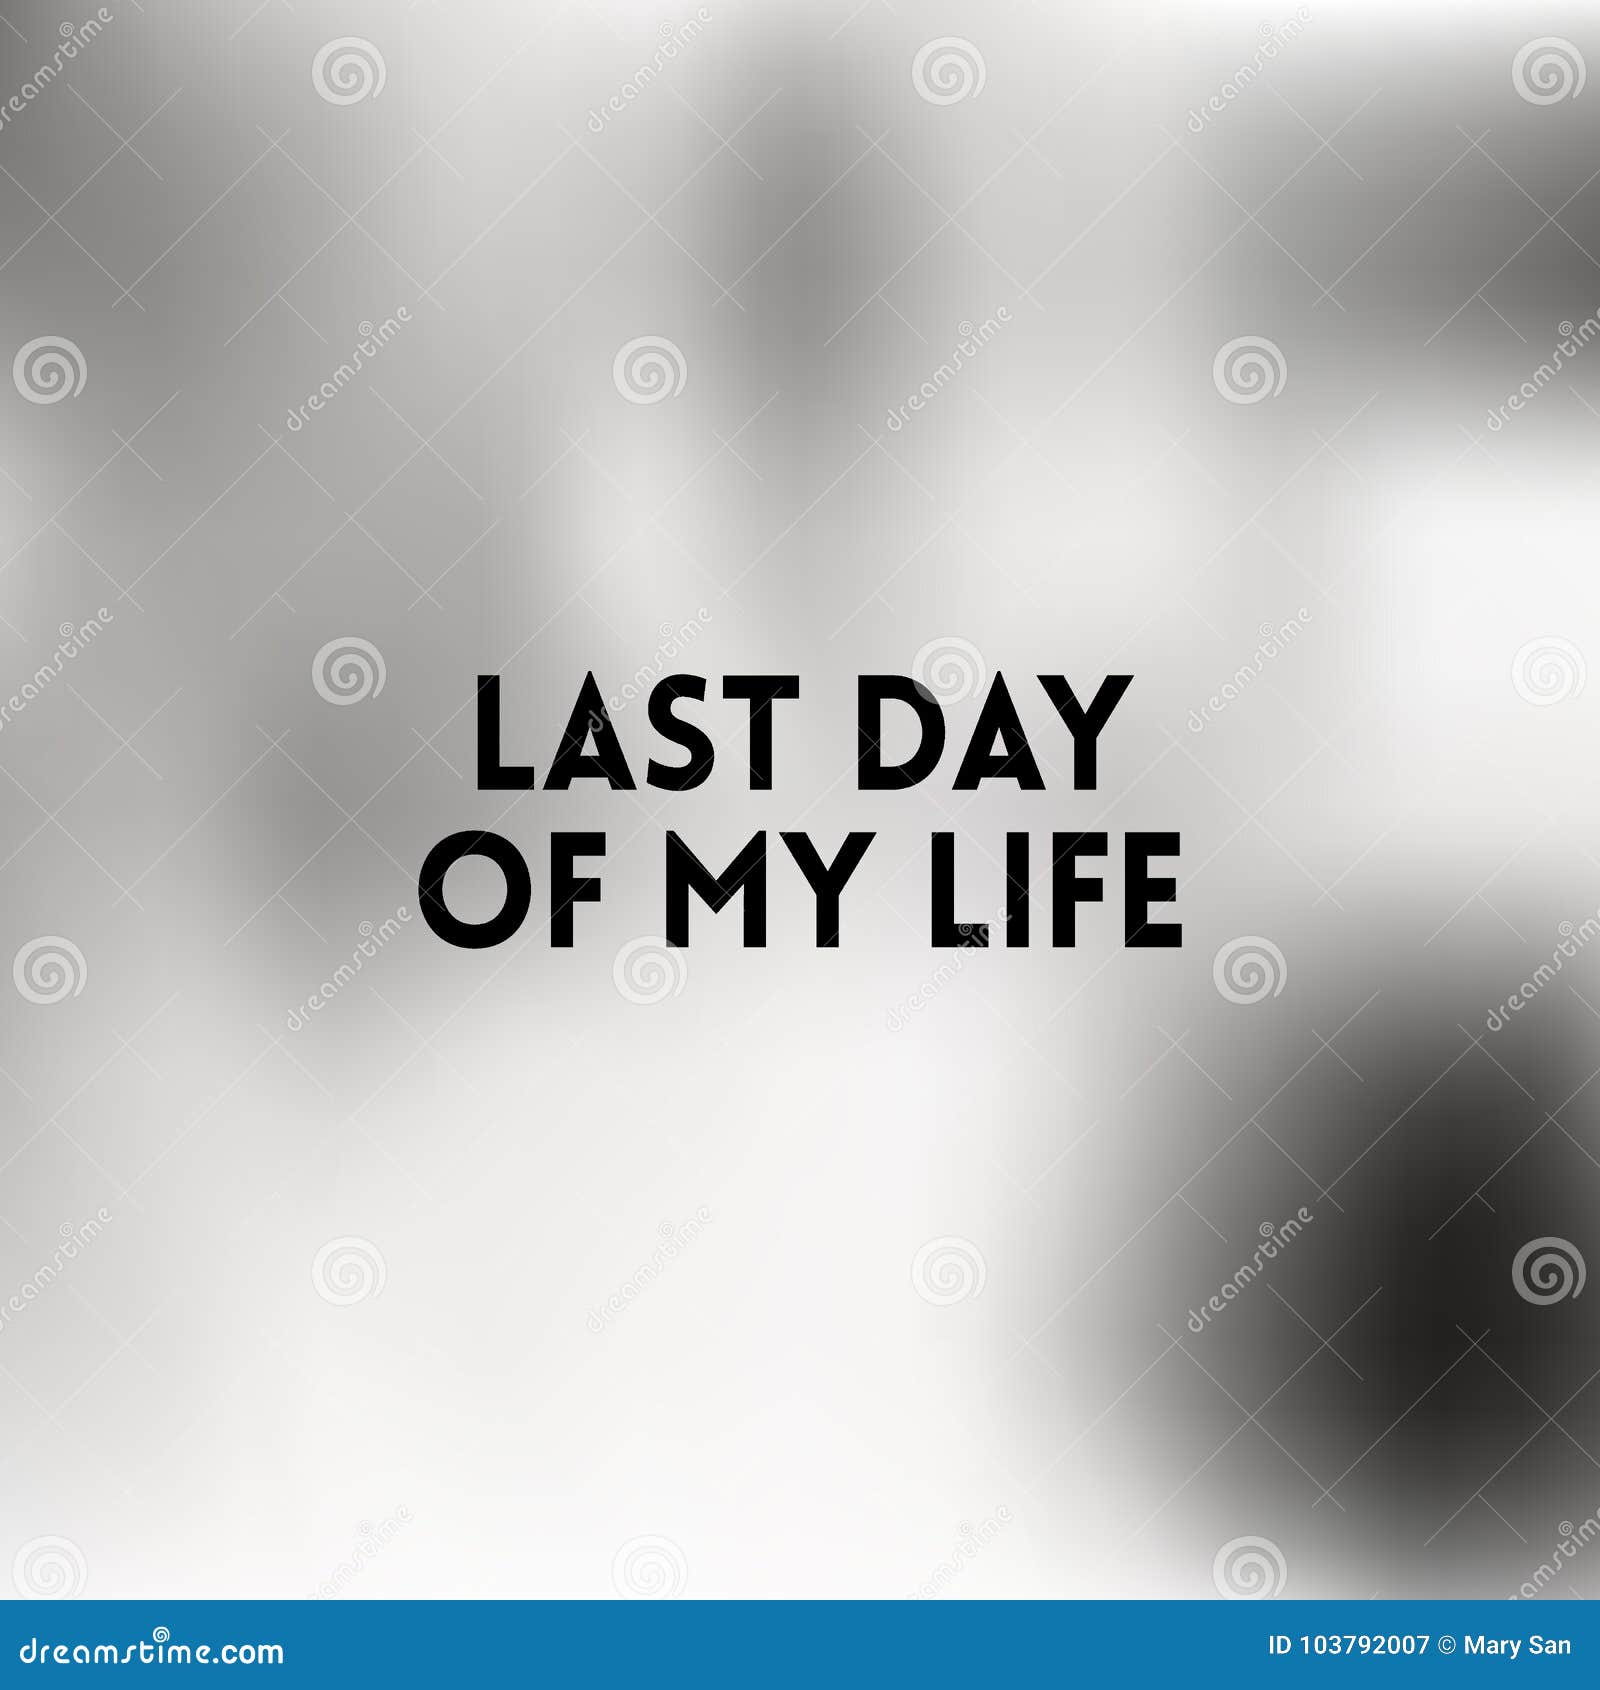 last day of my life